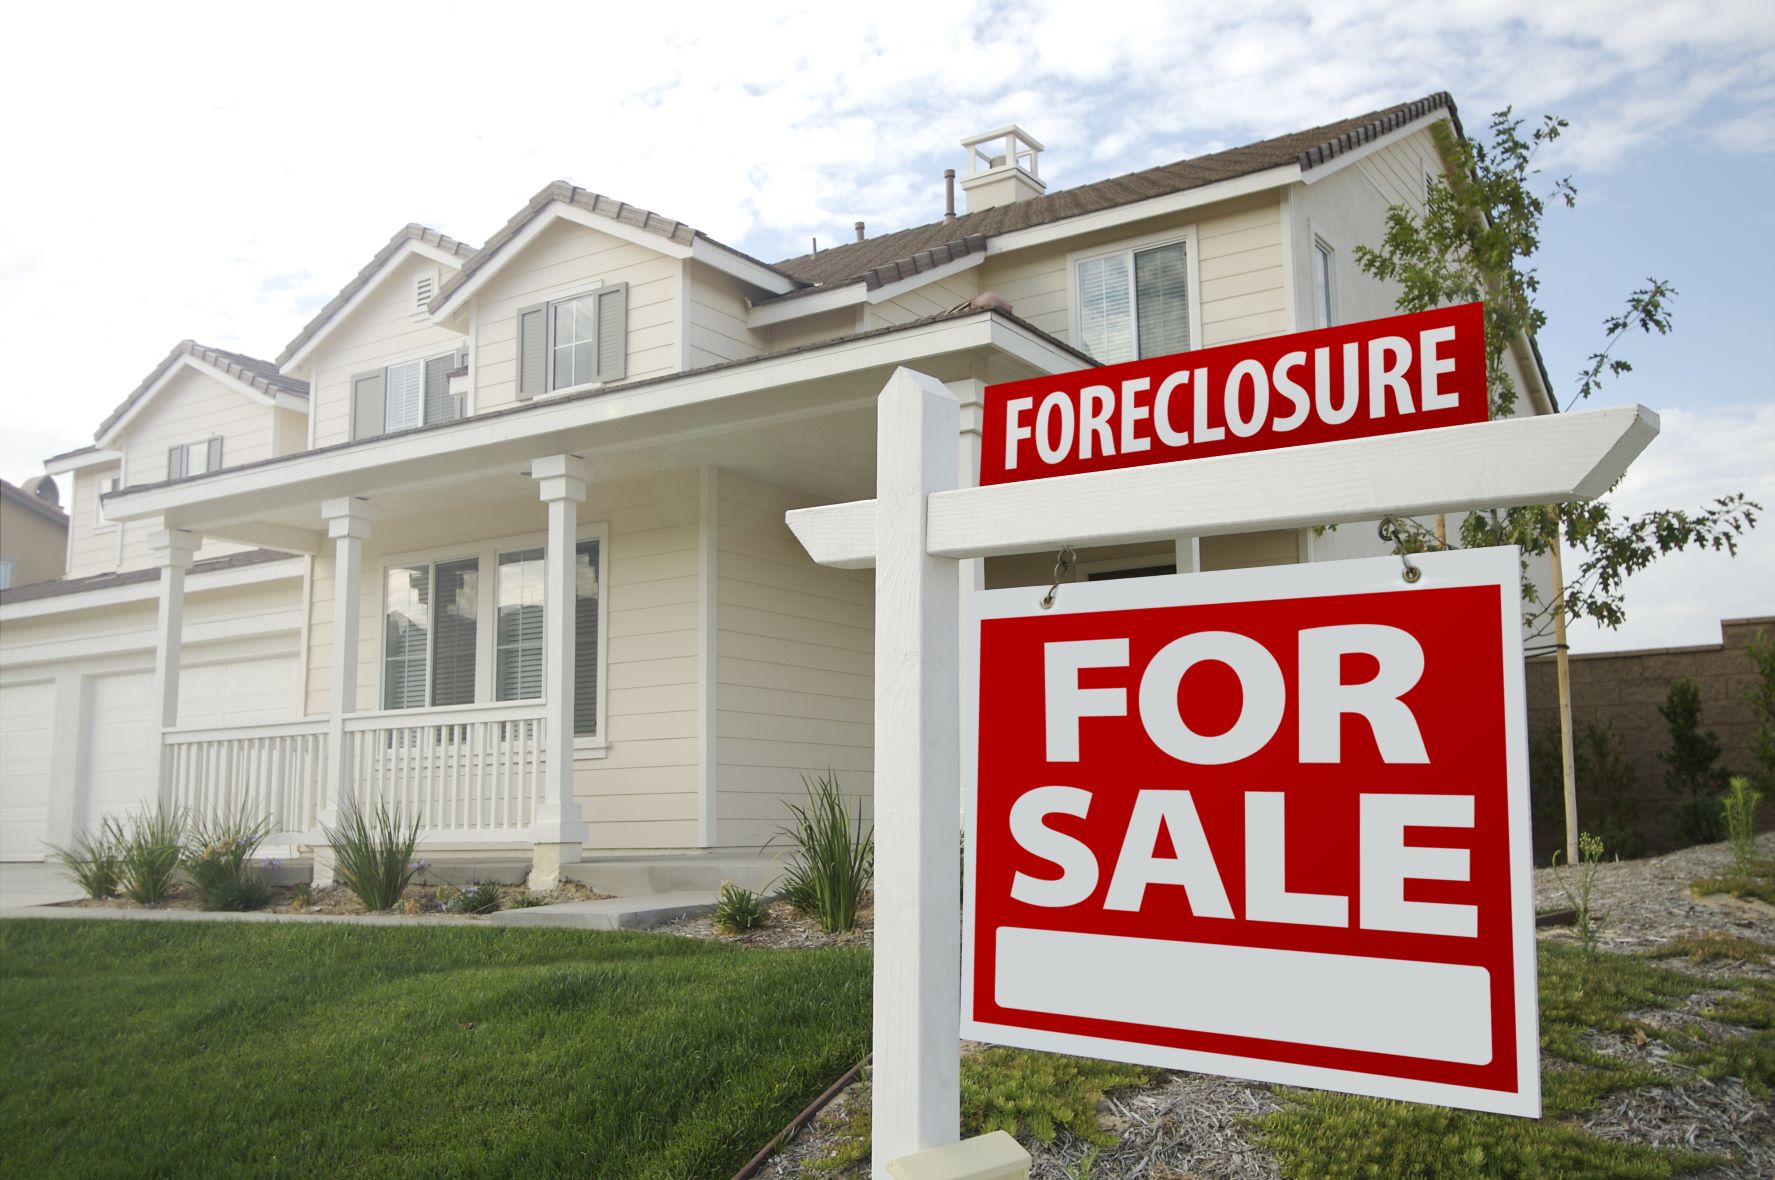 What You Should Know Before Considering a Home That Was Foreclosed